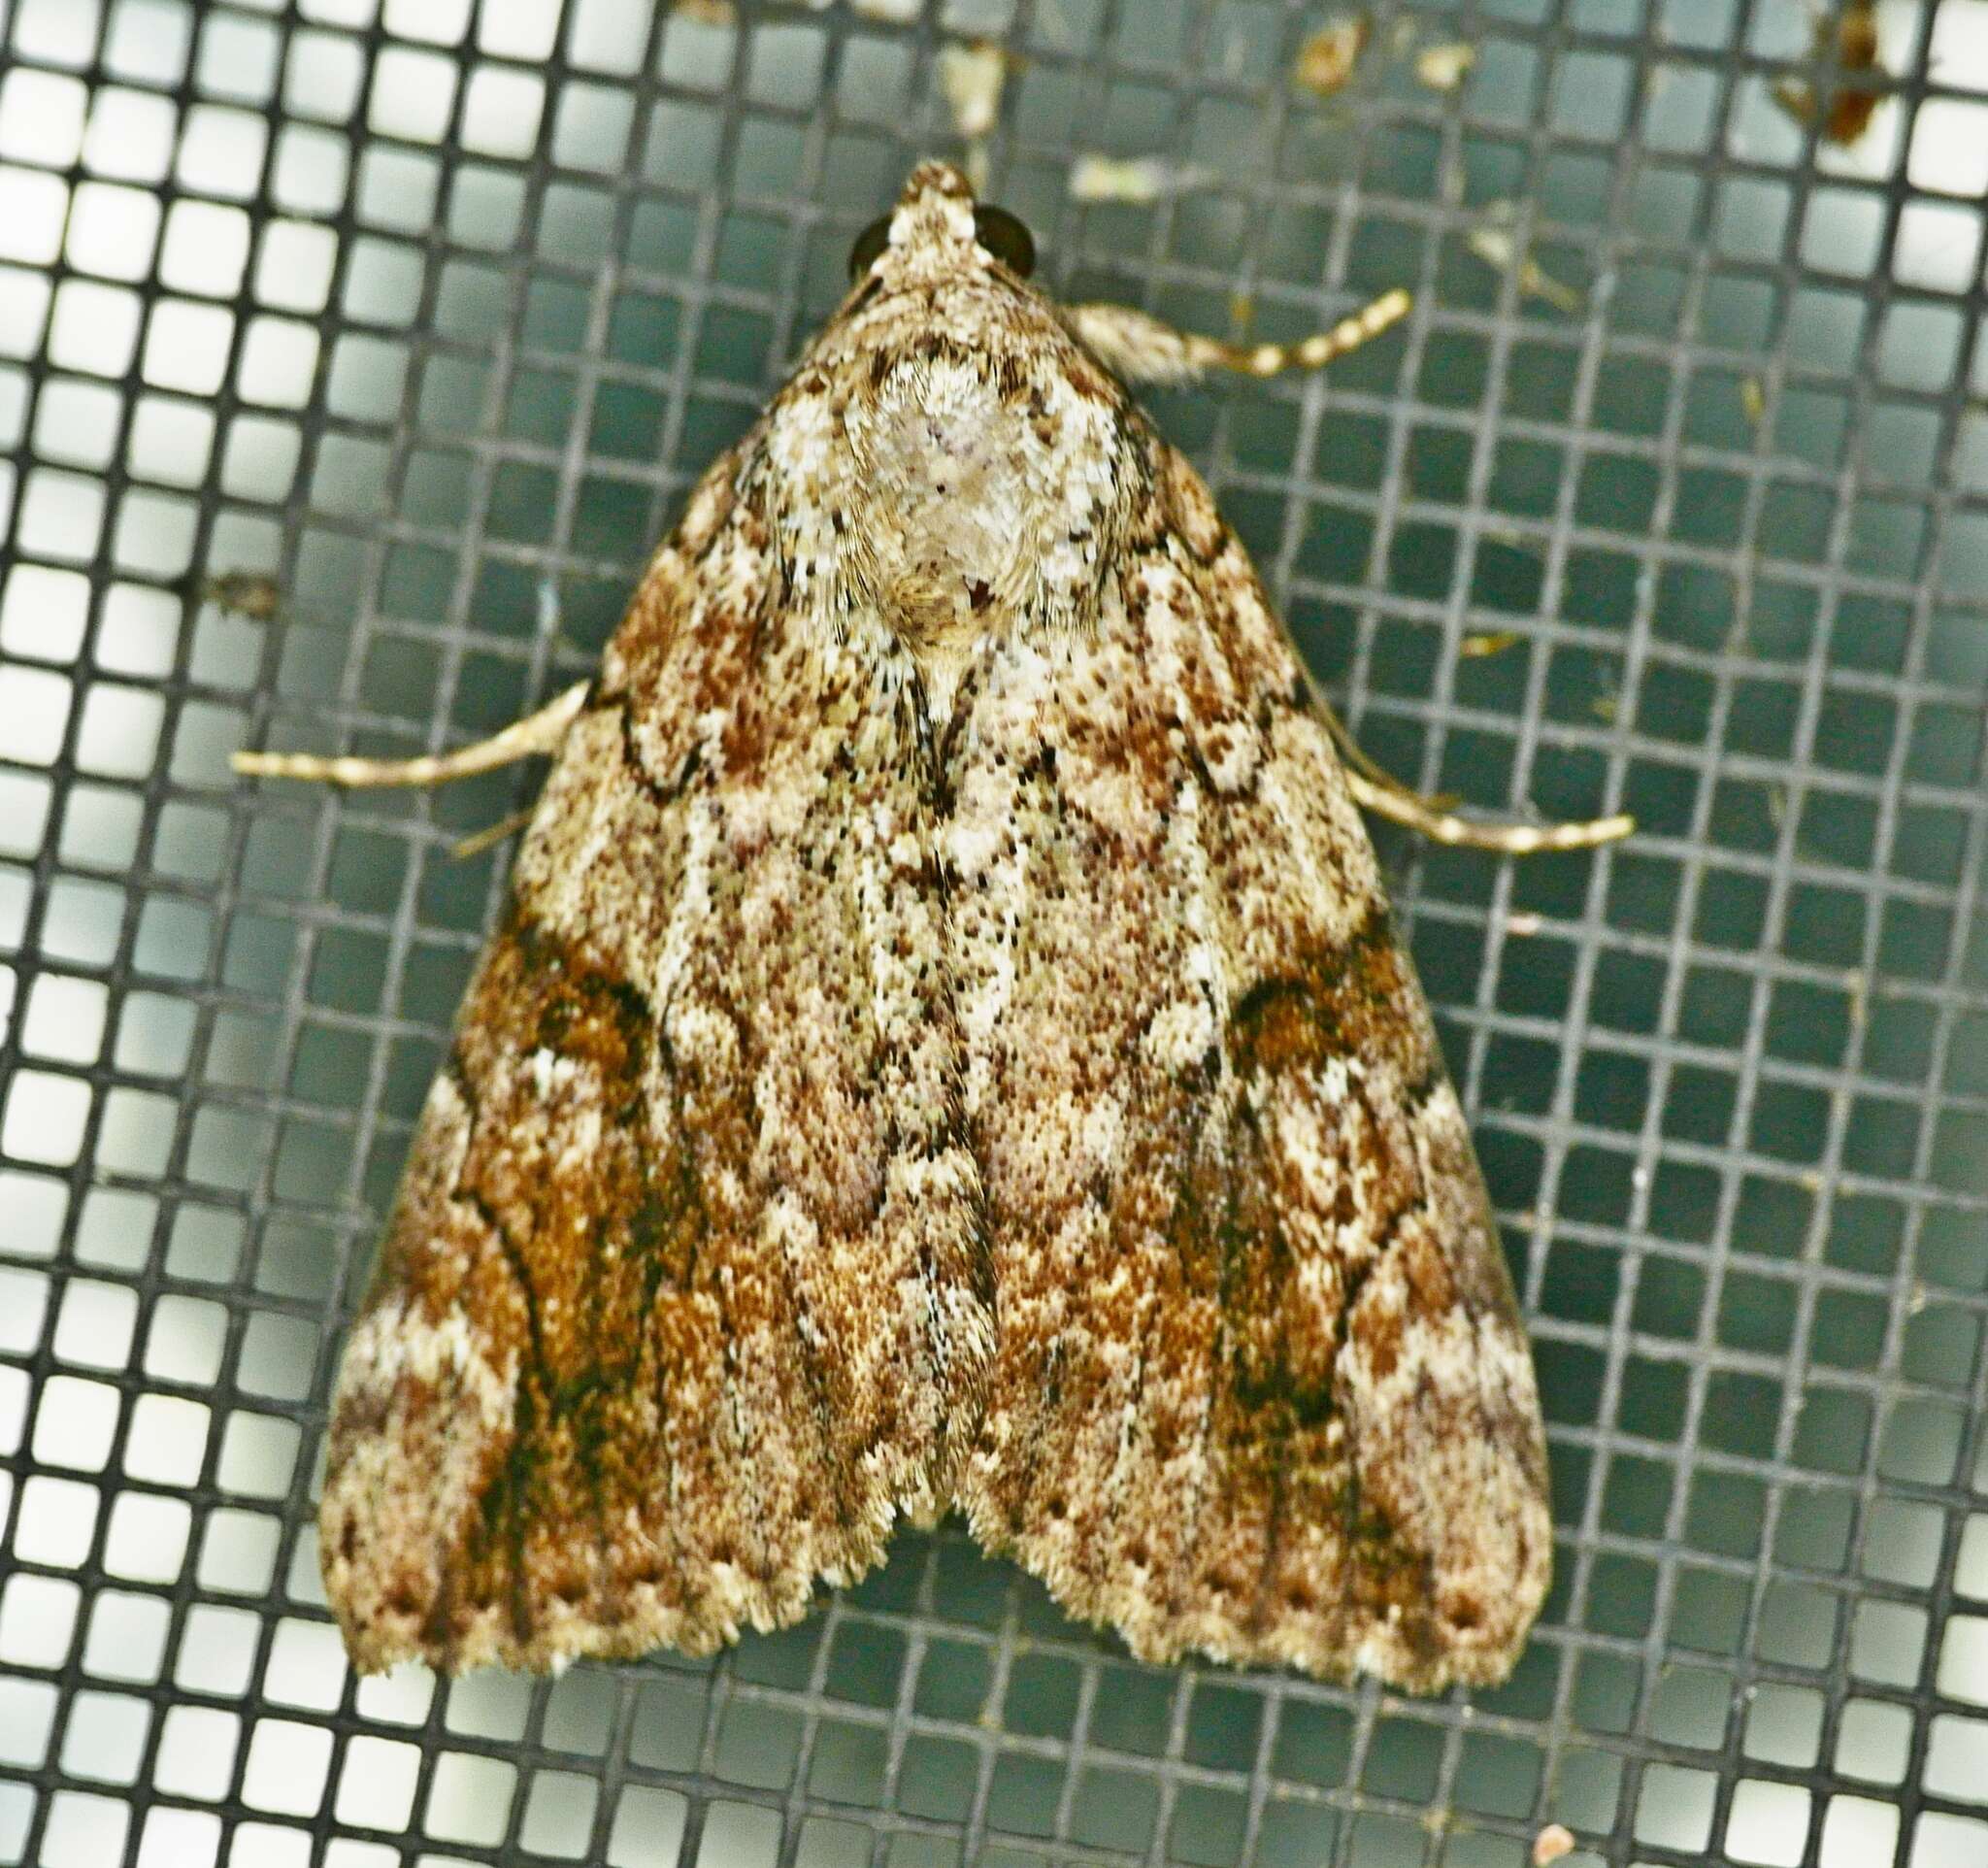 Image of Little Nymph Underwing